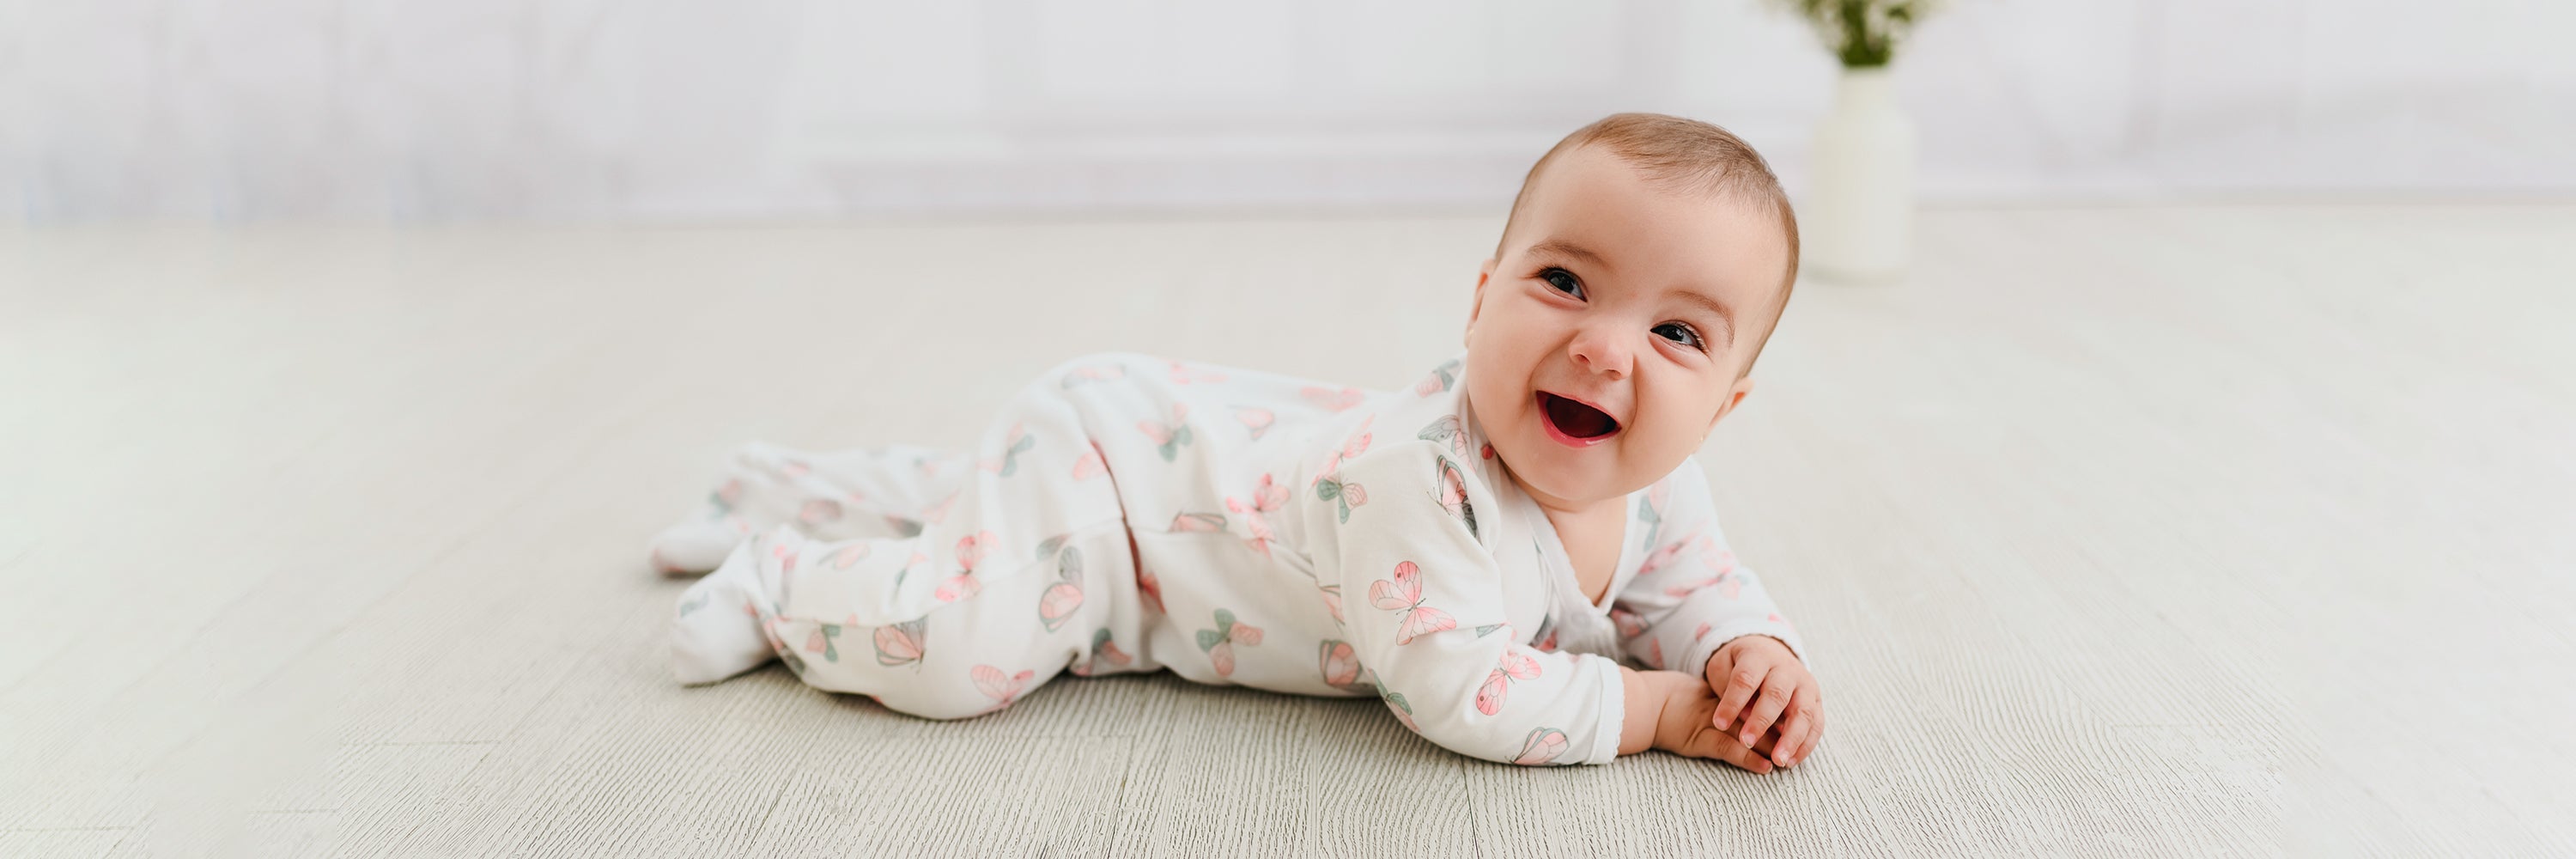 Baby girl in a Pima cotton footie happily lying on the floor